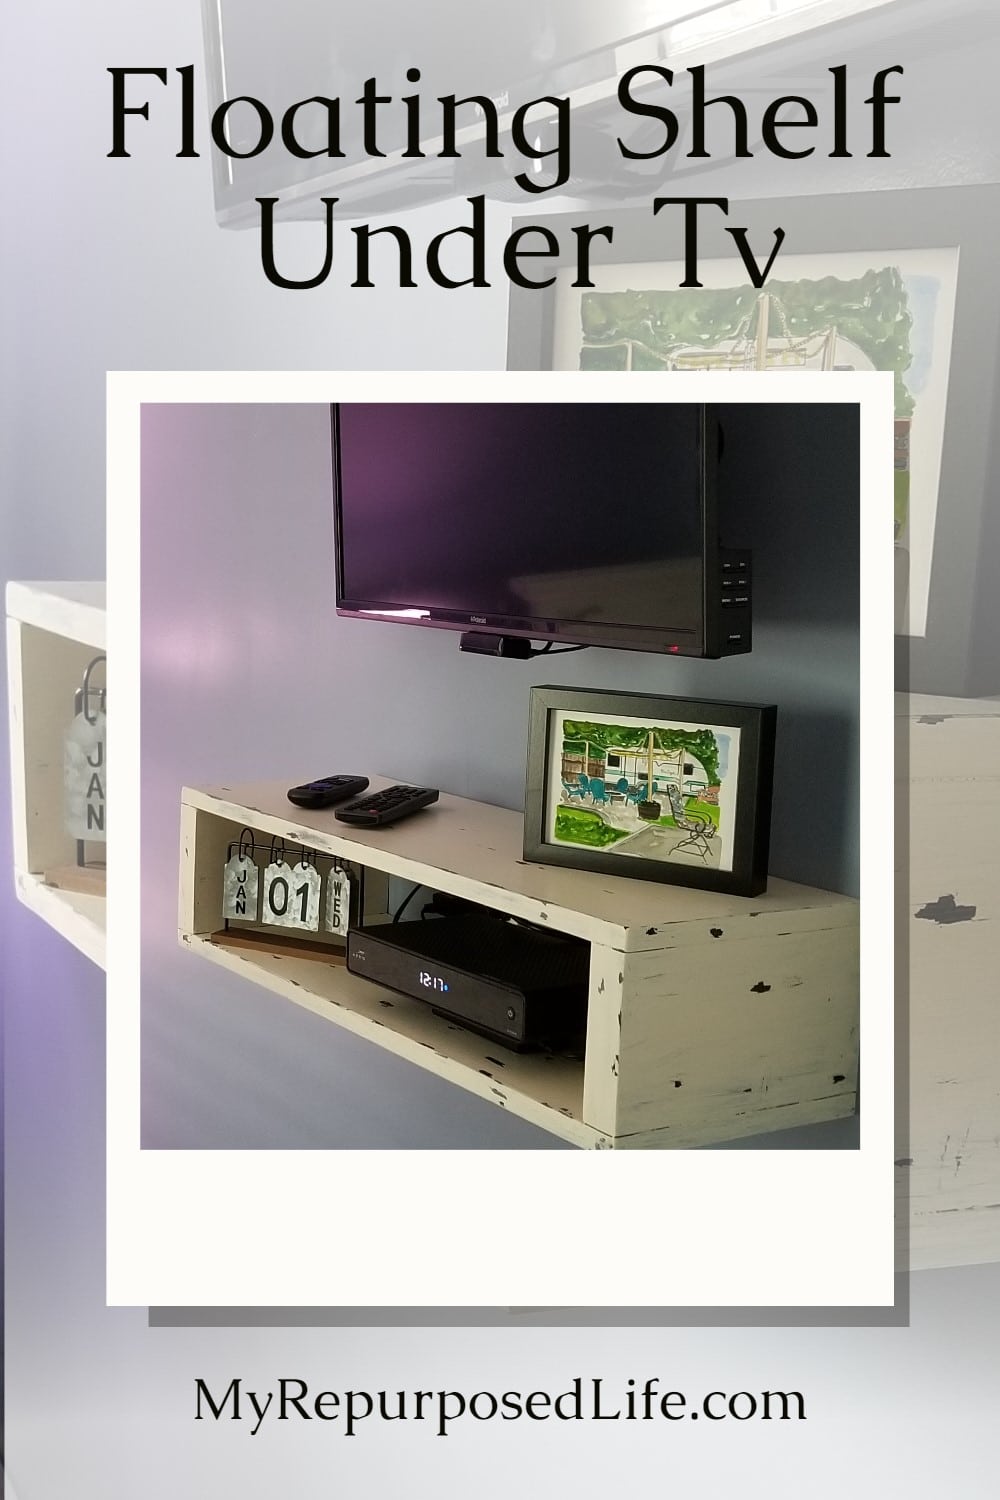 Solving the cord issue when hanging a t.v. on the wall can be quite challenging. I didn't have room for a media center, so I built a floating shelf. All directions included in this tutorial. Bonus: Fishing the wires #MyRepurposedLife #organization #letsgetorganized #bloggerchallenge via @repurposedlife